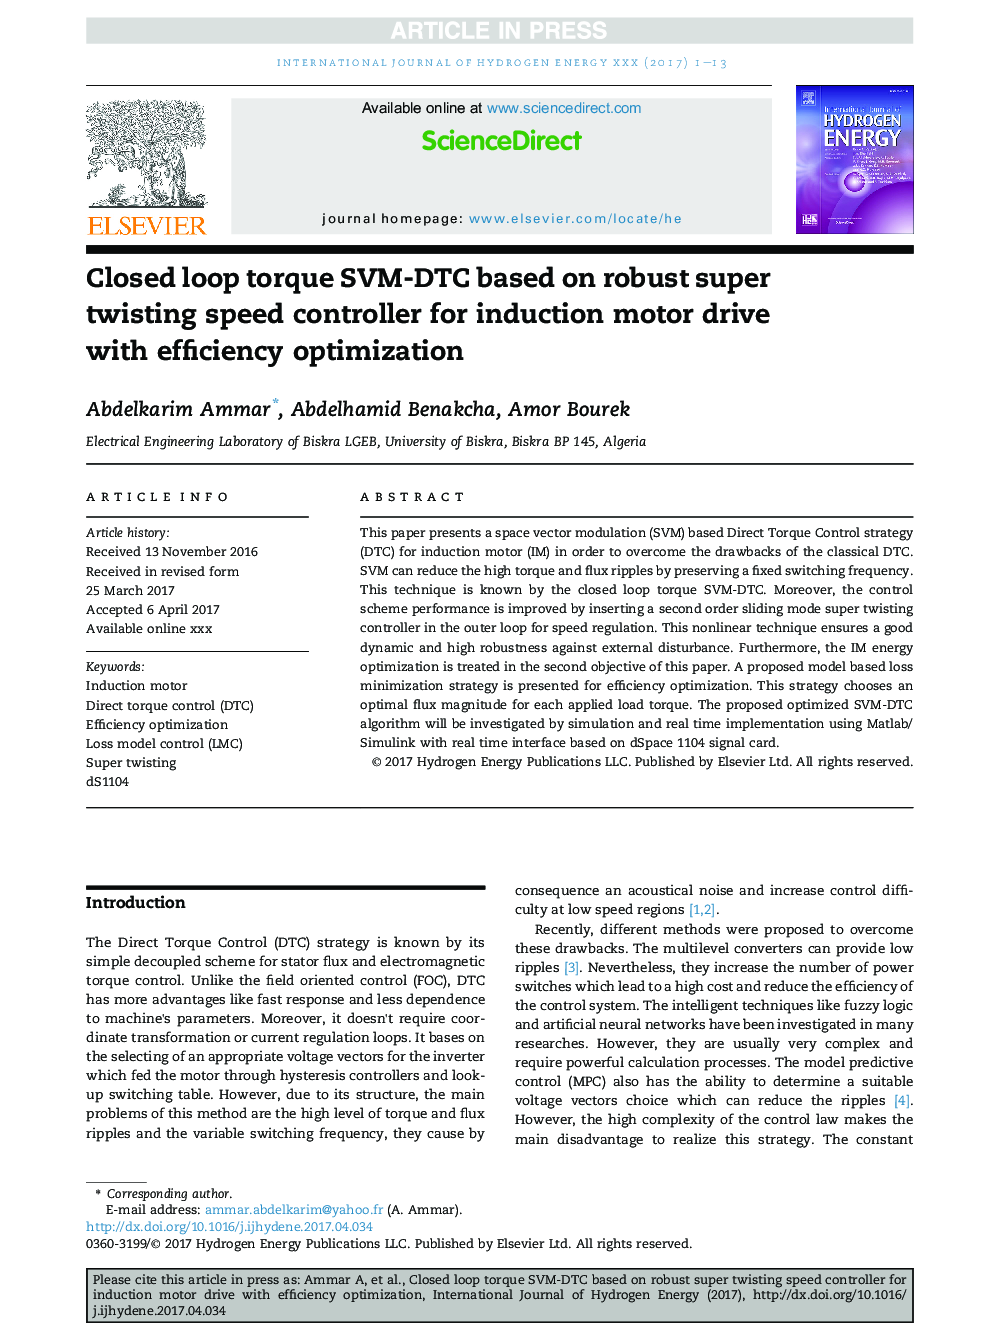 Closed loop torque SVM-DTC based on robust super twisting speed controller for induction motor drive with efficiency optimization